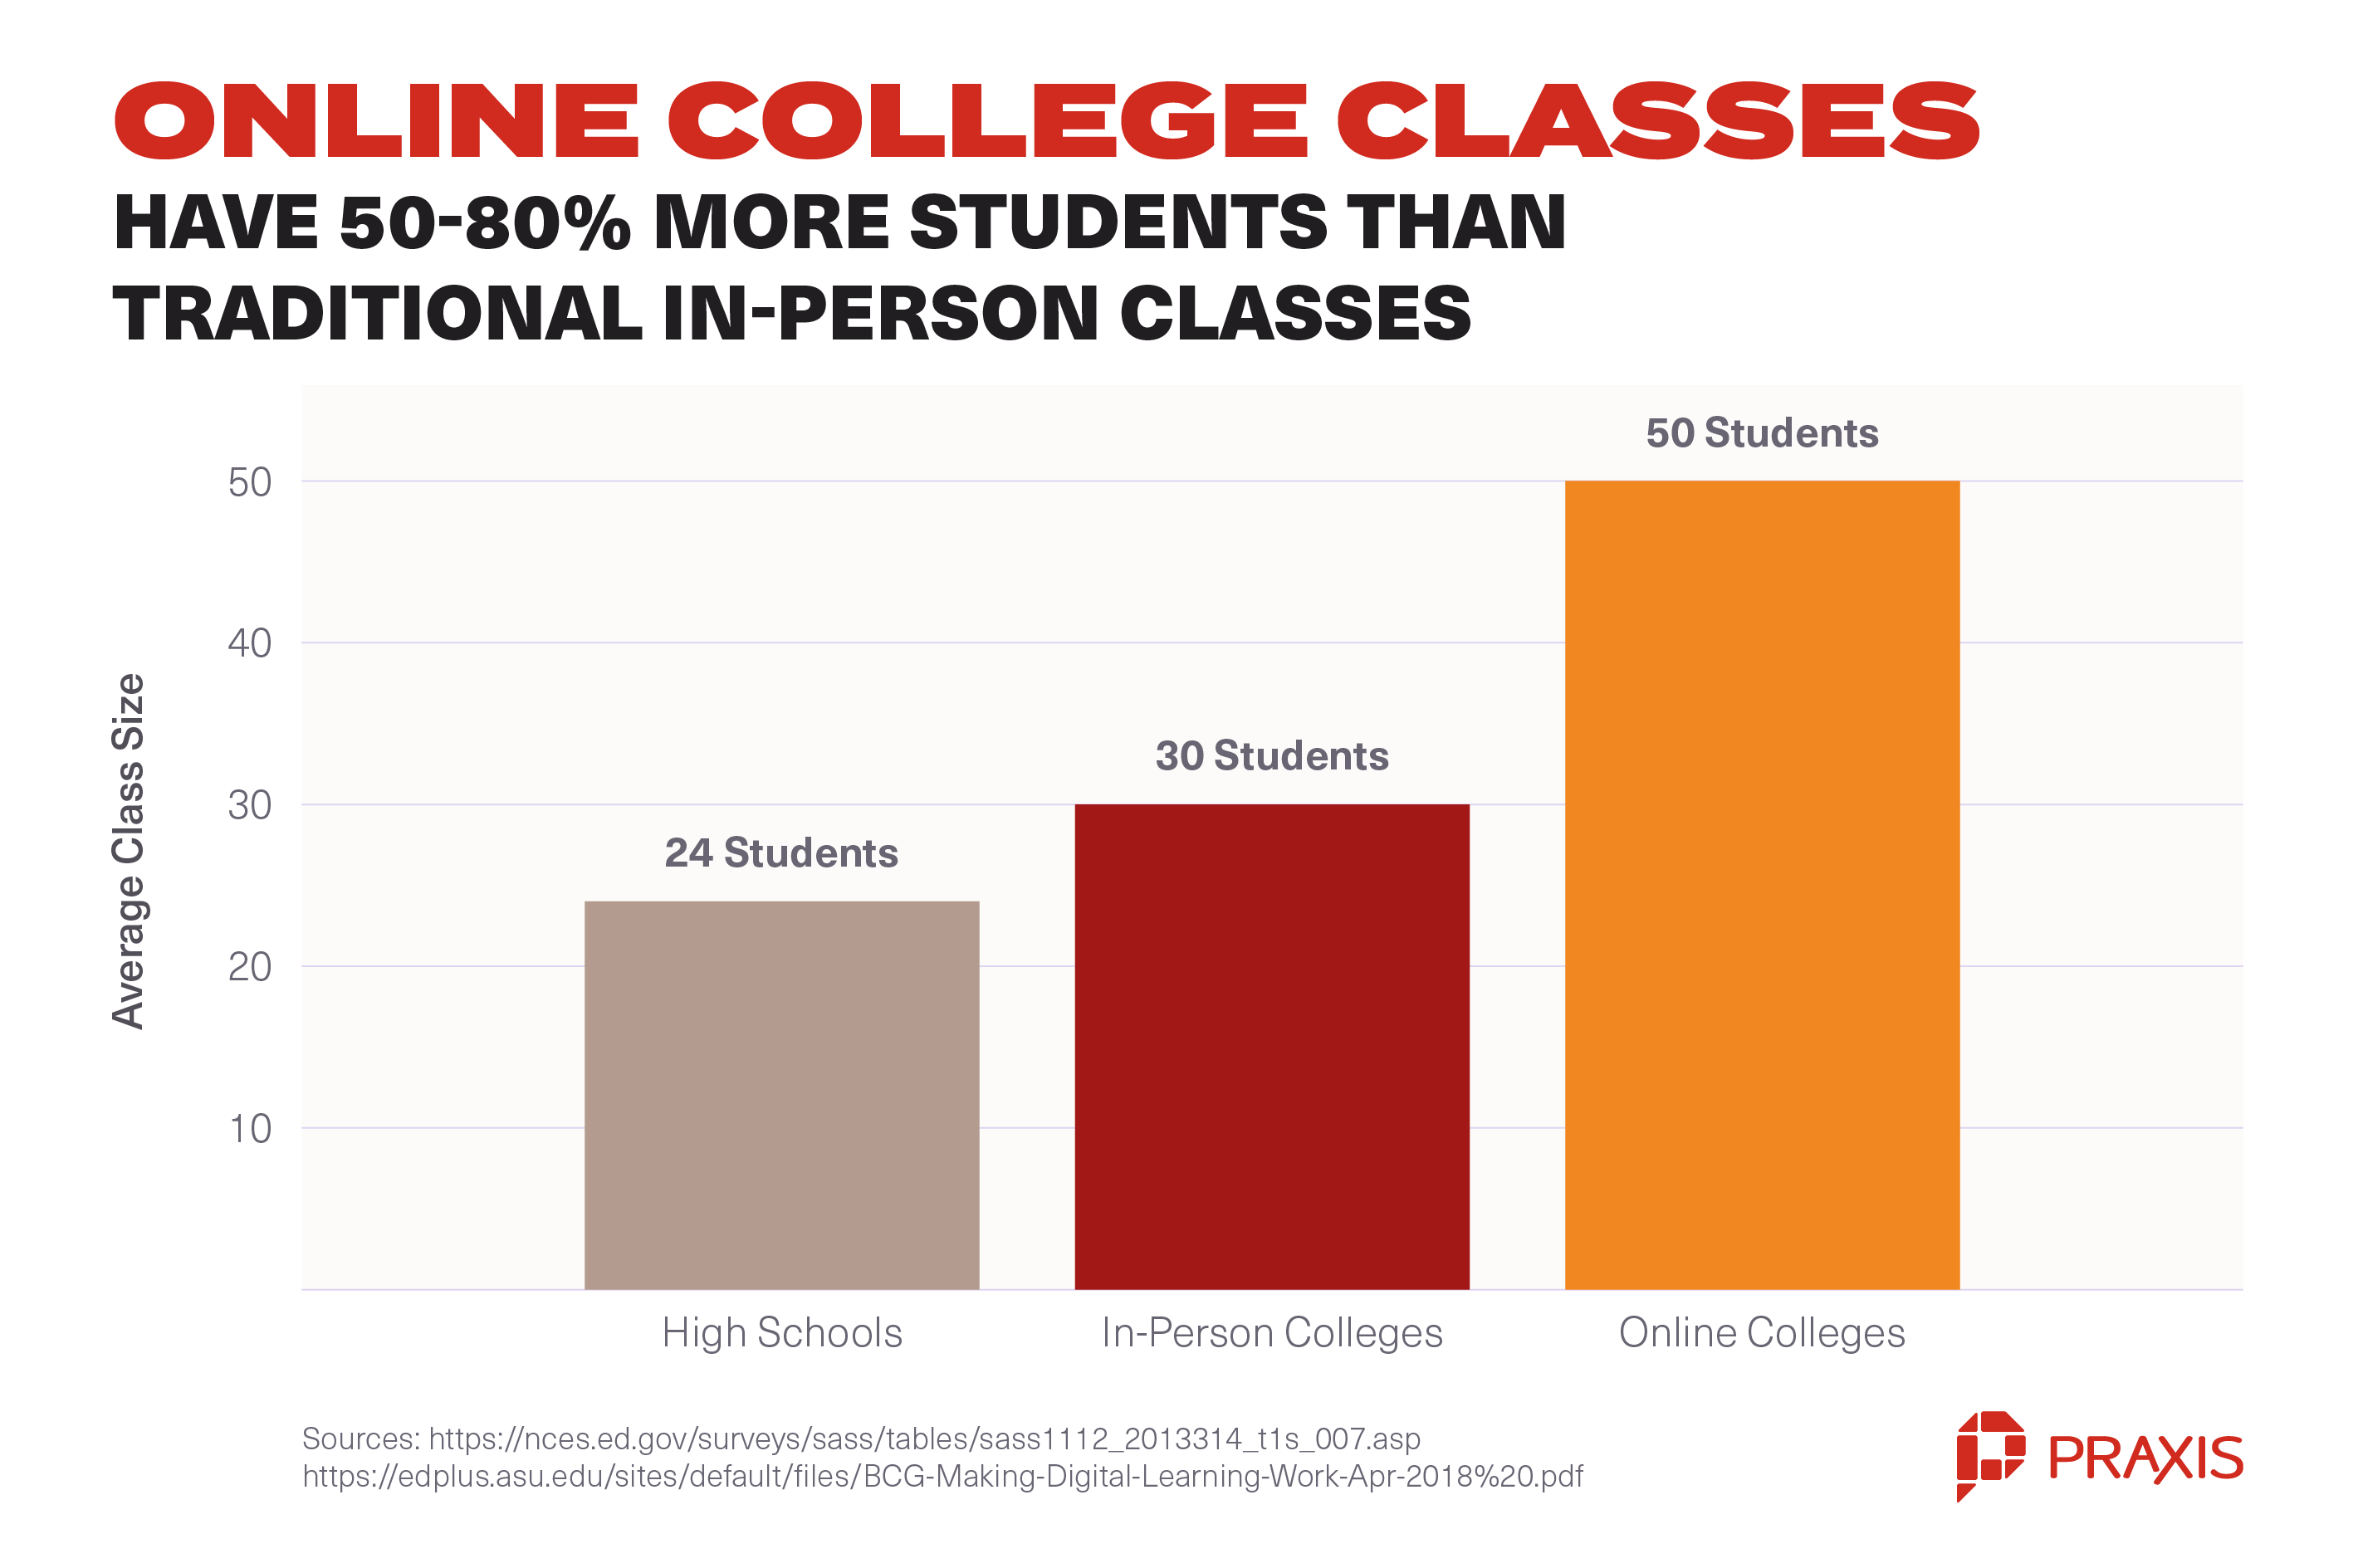 Most online programs have much larger class sizes